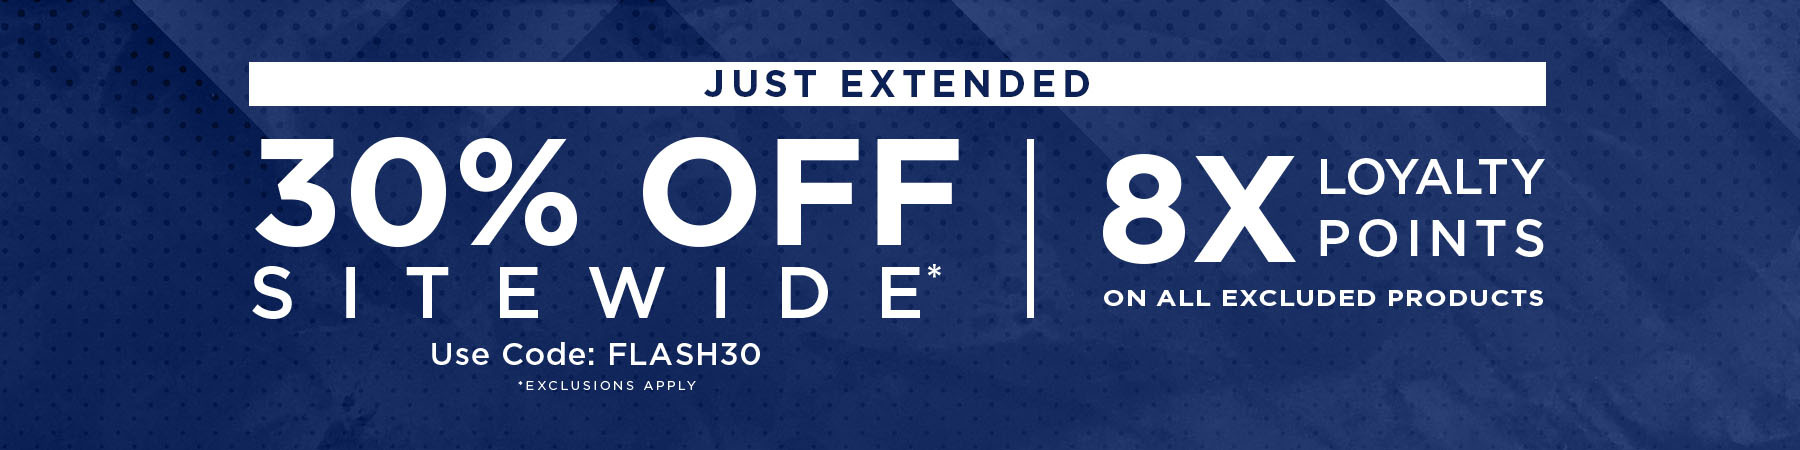 30% off Sitewide with Code FLASH30 + 8x loyalty points on excluded products